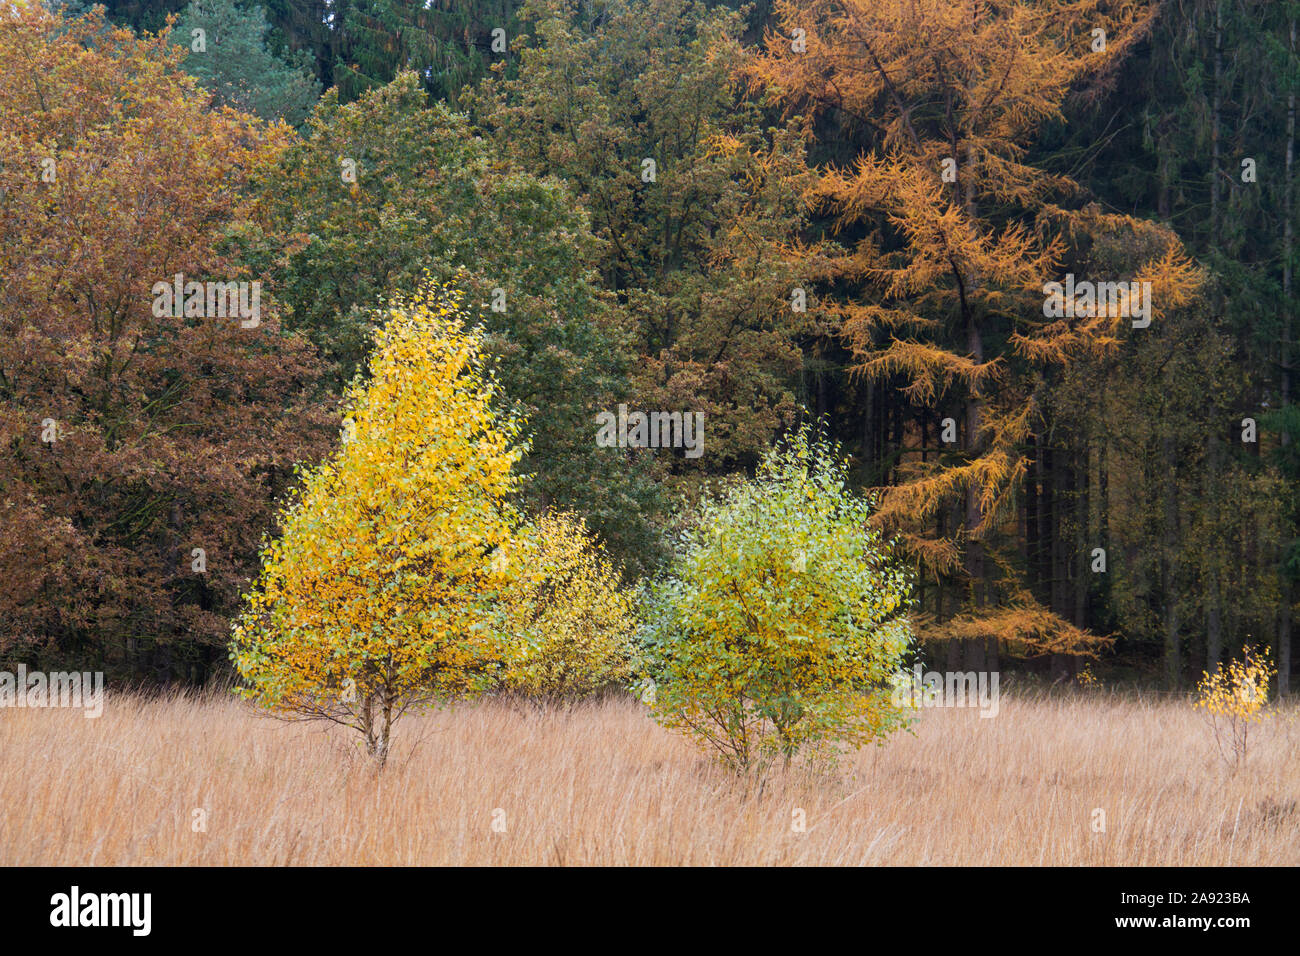 Young Birch trees in autumn colors a heath, grown with Purple moor grass, in the background a forest Stock Photo